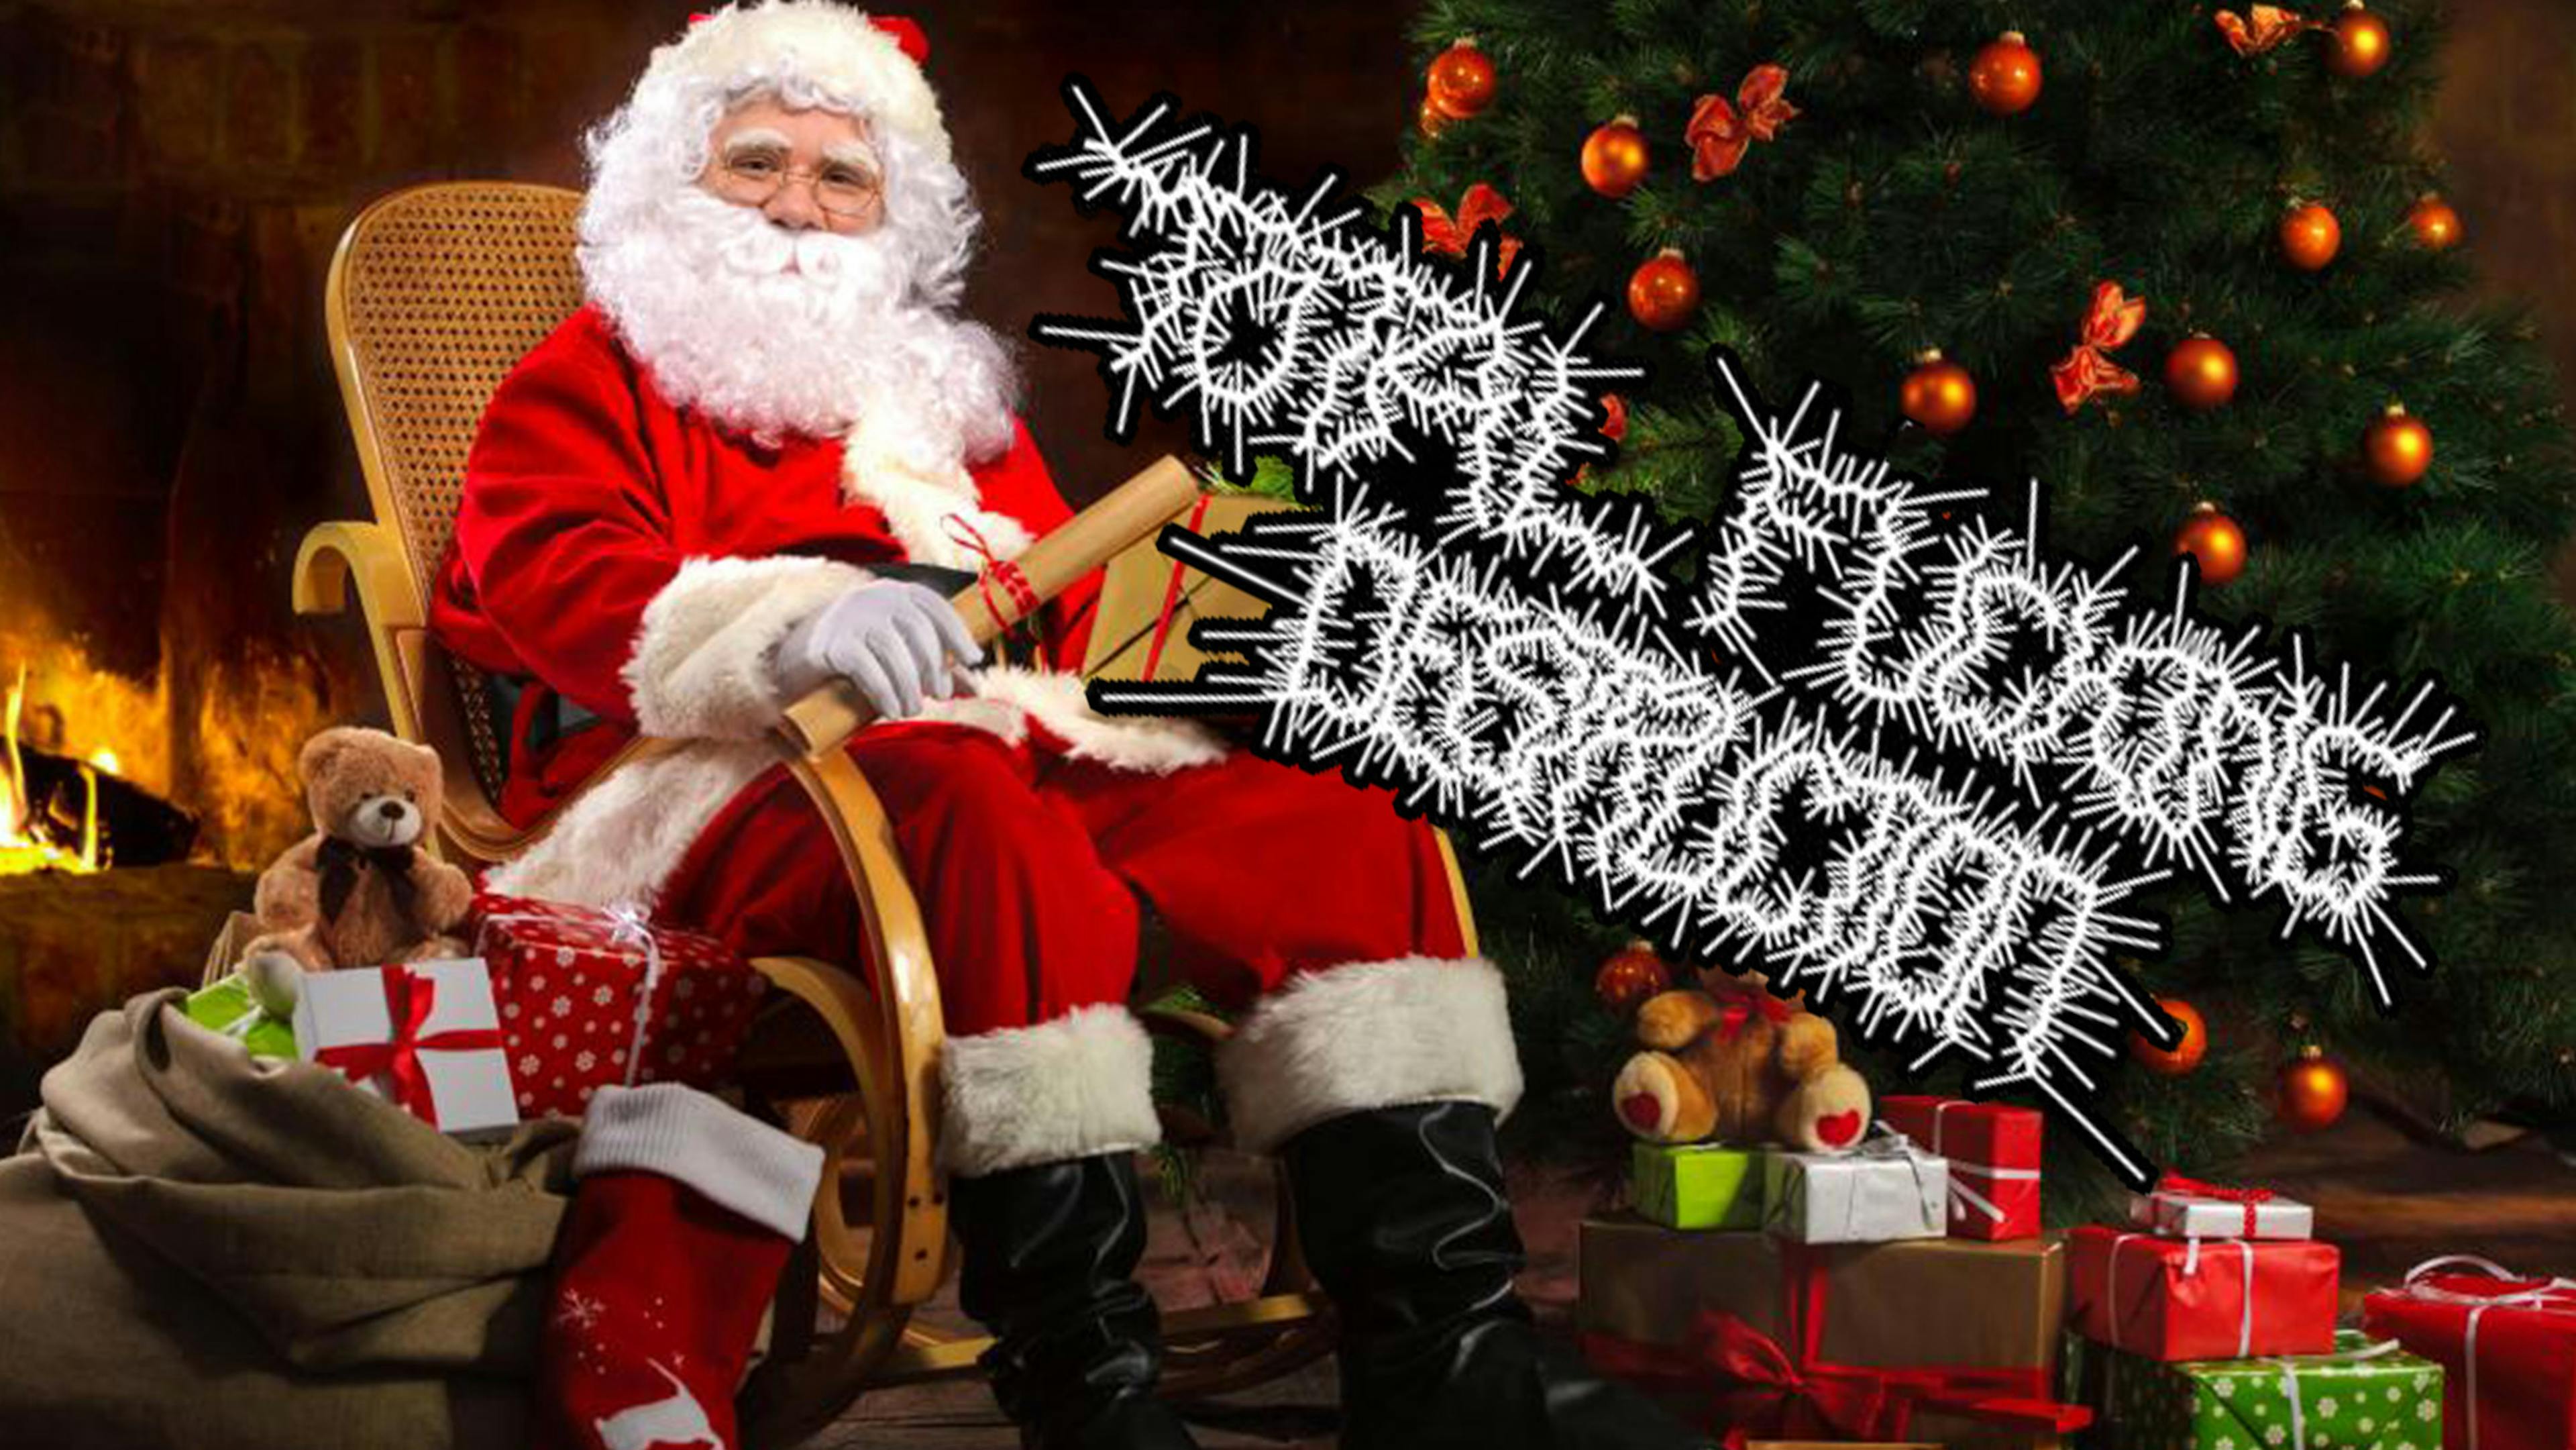 Simply Having A Wonderful Christmas Time, Grindcore Style